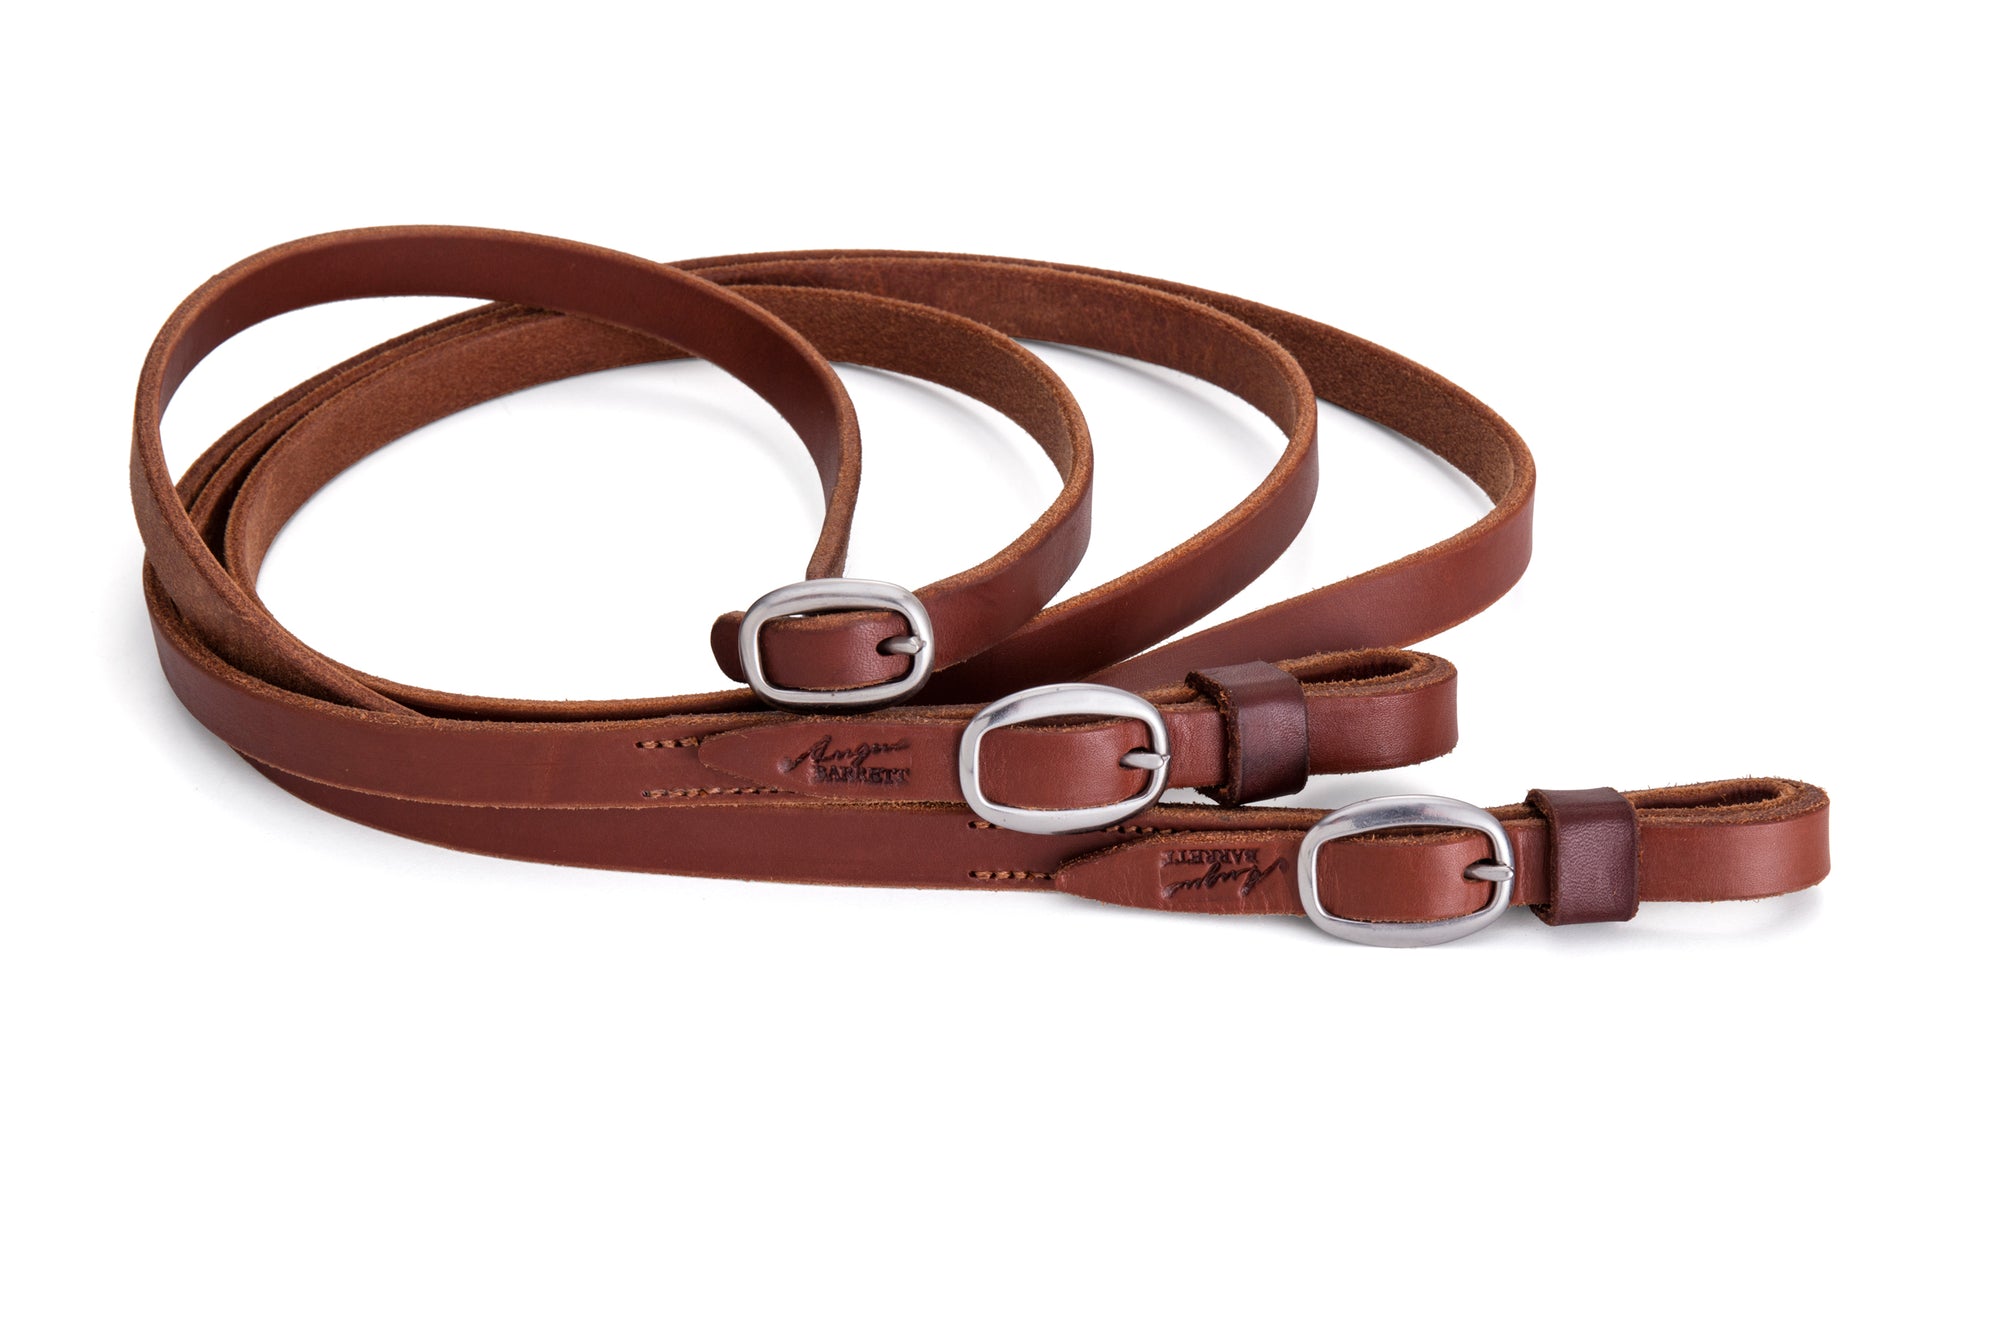 Angus Barrett Saddlery Joined Reins in Natural with stainless steel buckles